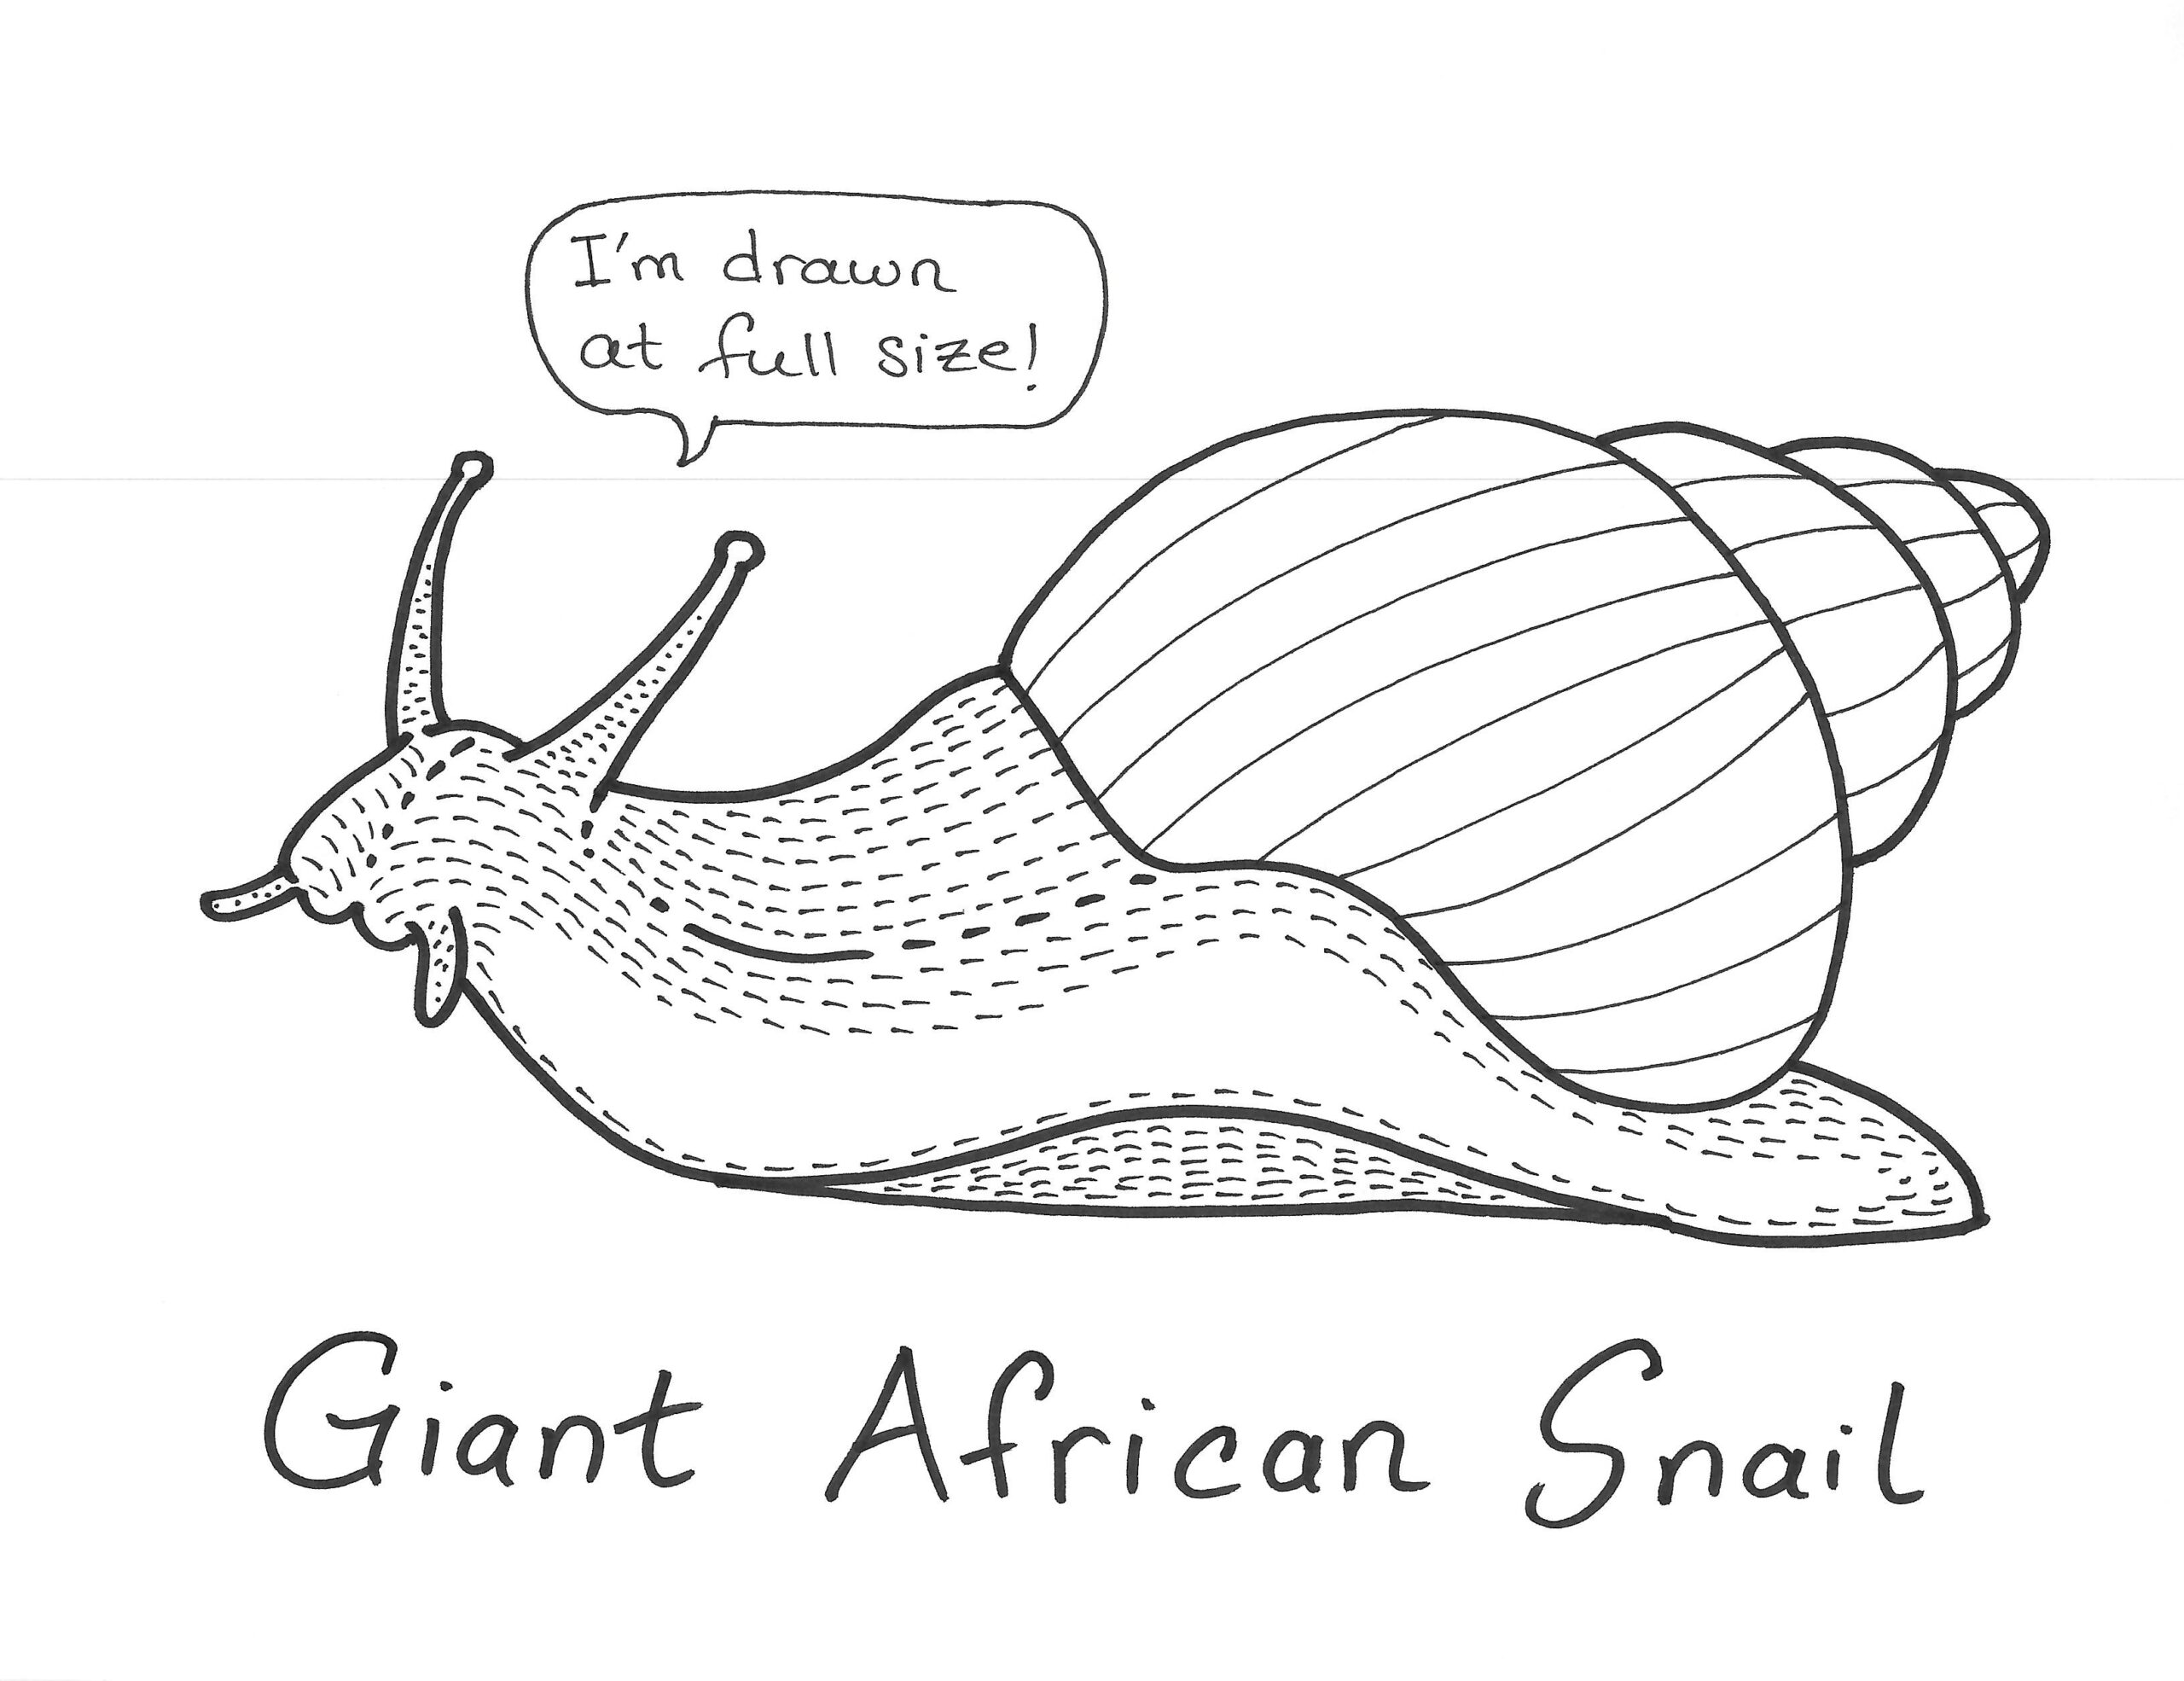 Illustration of Giant African Snail